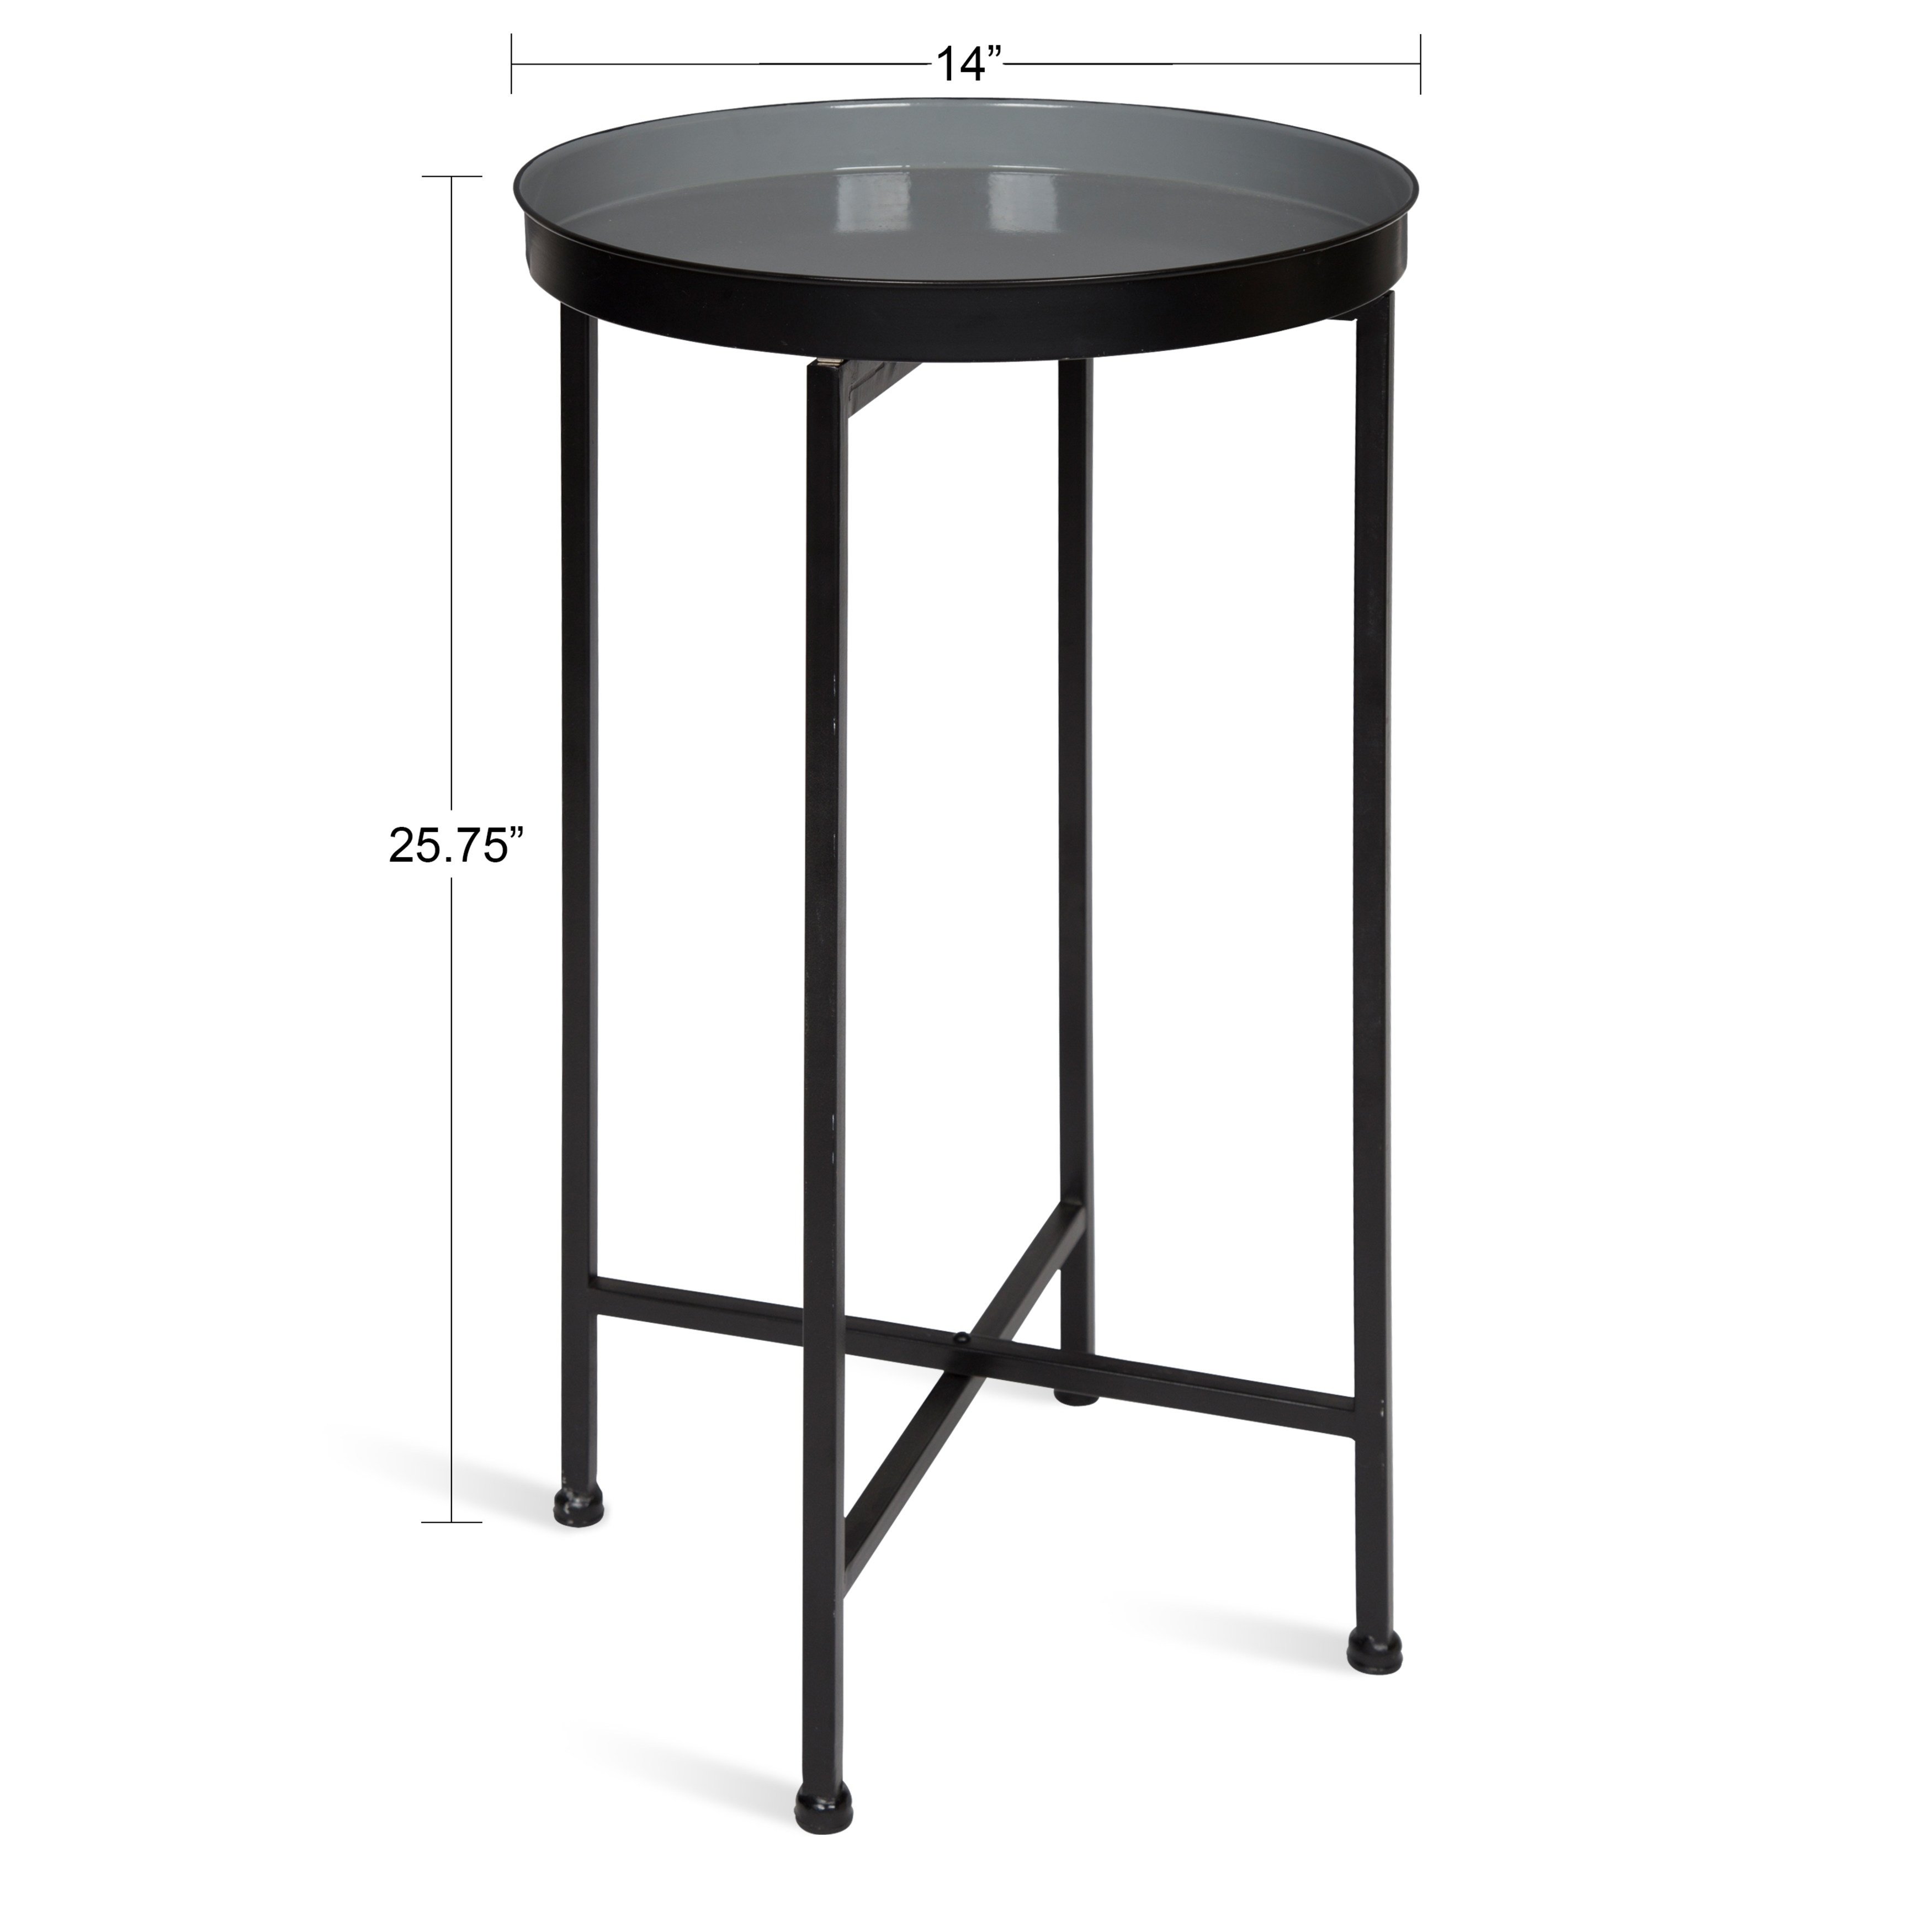 kate and laurel celia round foldable tray accent table free metal with shipping today best computer desk nautical light fixtures half circle entry living room storage chest